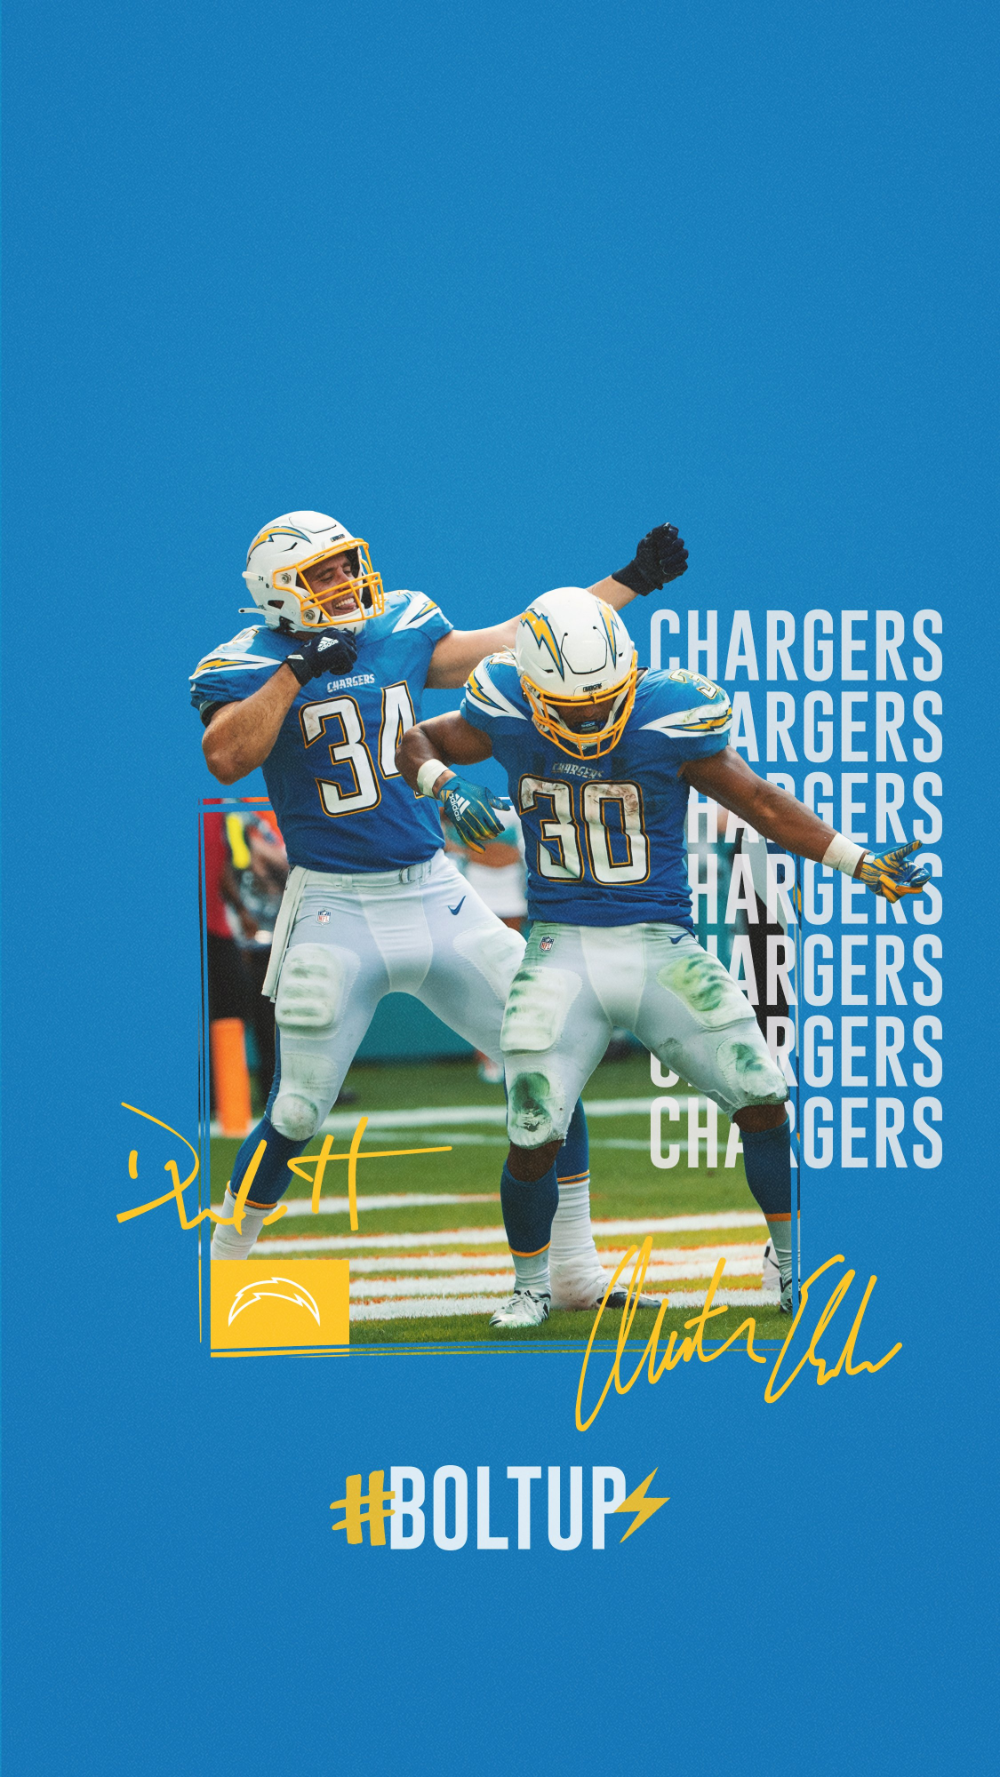 Chargers Wallpaper. Los Angeles Chargers.com. Los angeles chargers, Nfl football art, Sports graphic design